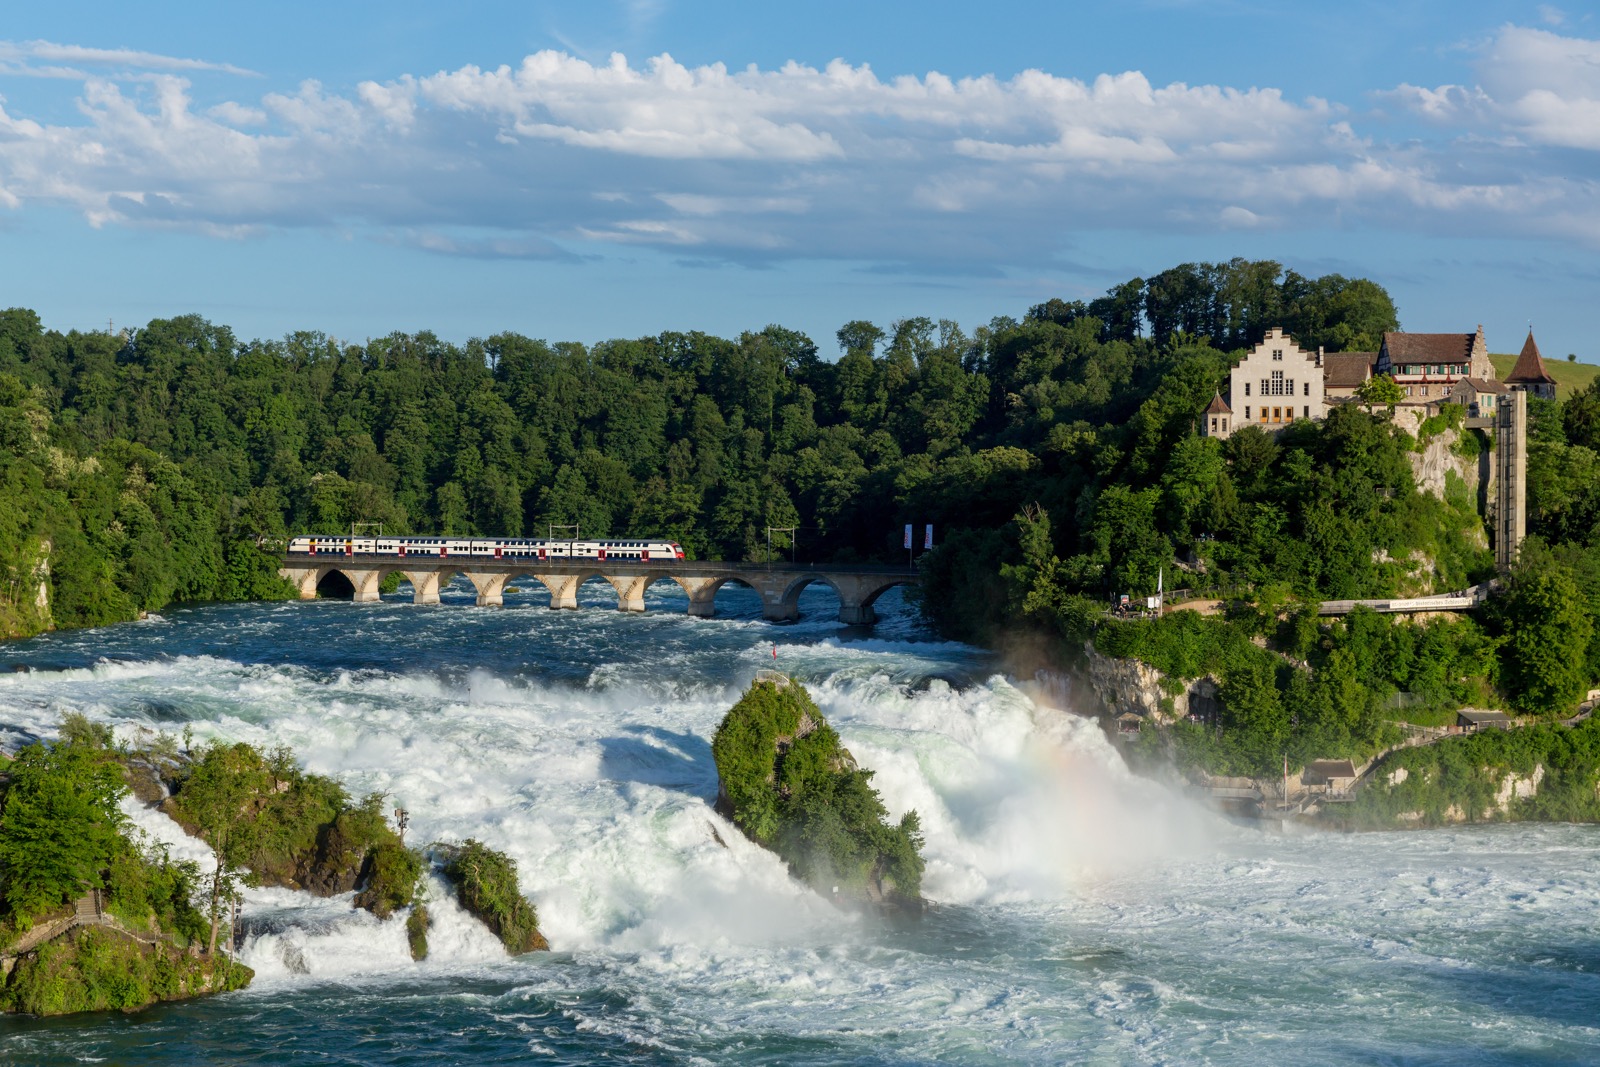 Are You a World Traveler? Test Your Knowledge by Matching These Majestic Natural Sites to Their Countries! Rhine Falls, Switzerland